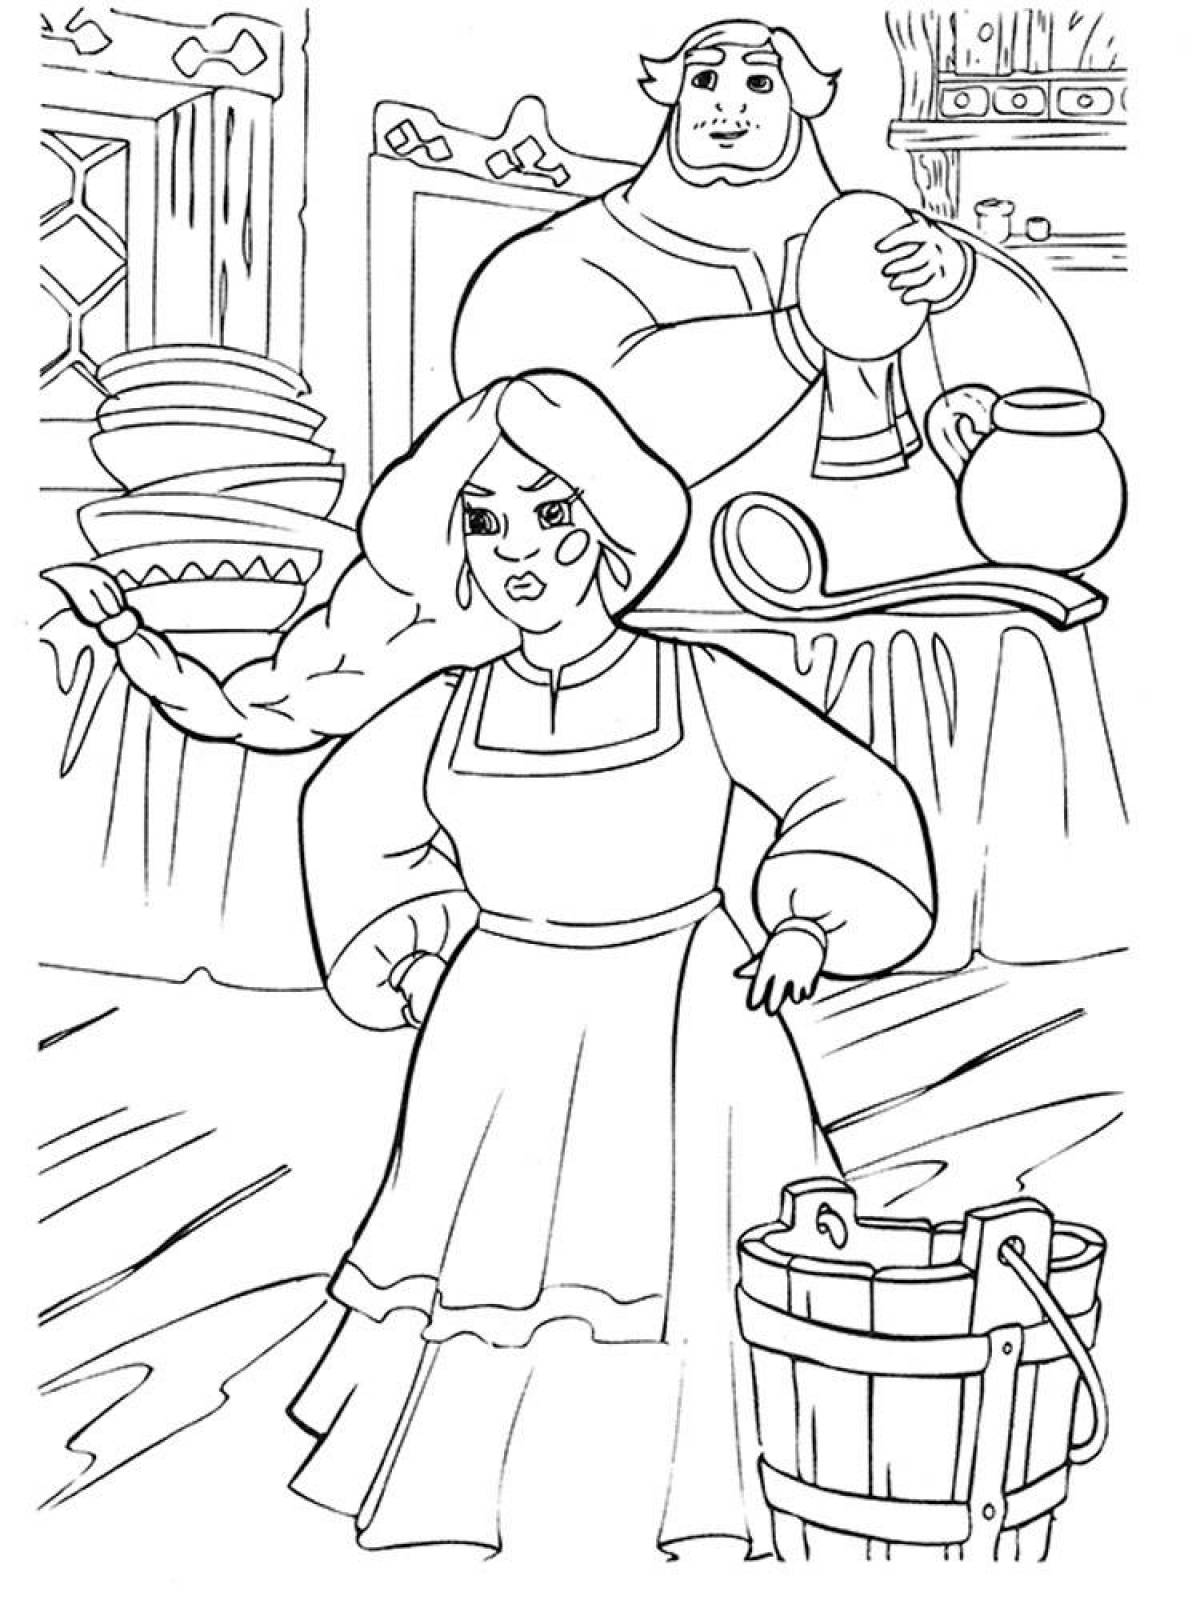 Three fearless heroes coloring page